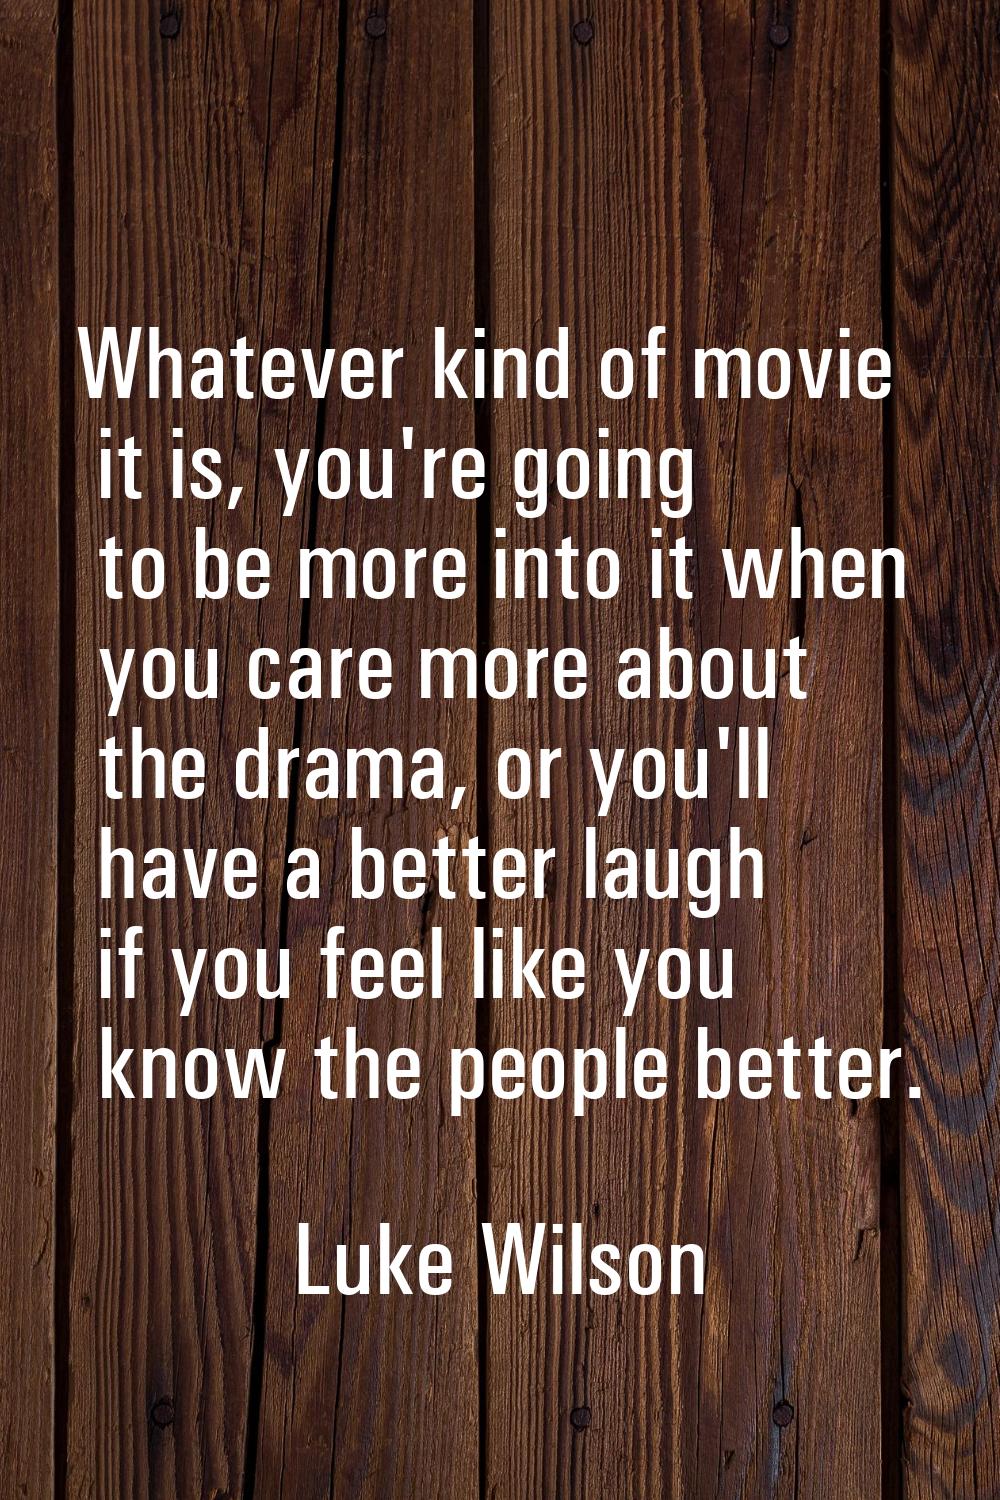 Whatever kind of movie it is, you're going to be more into it when you care more about the drama, o